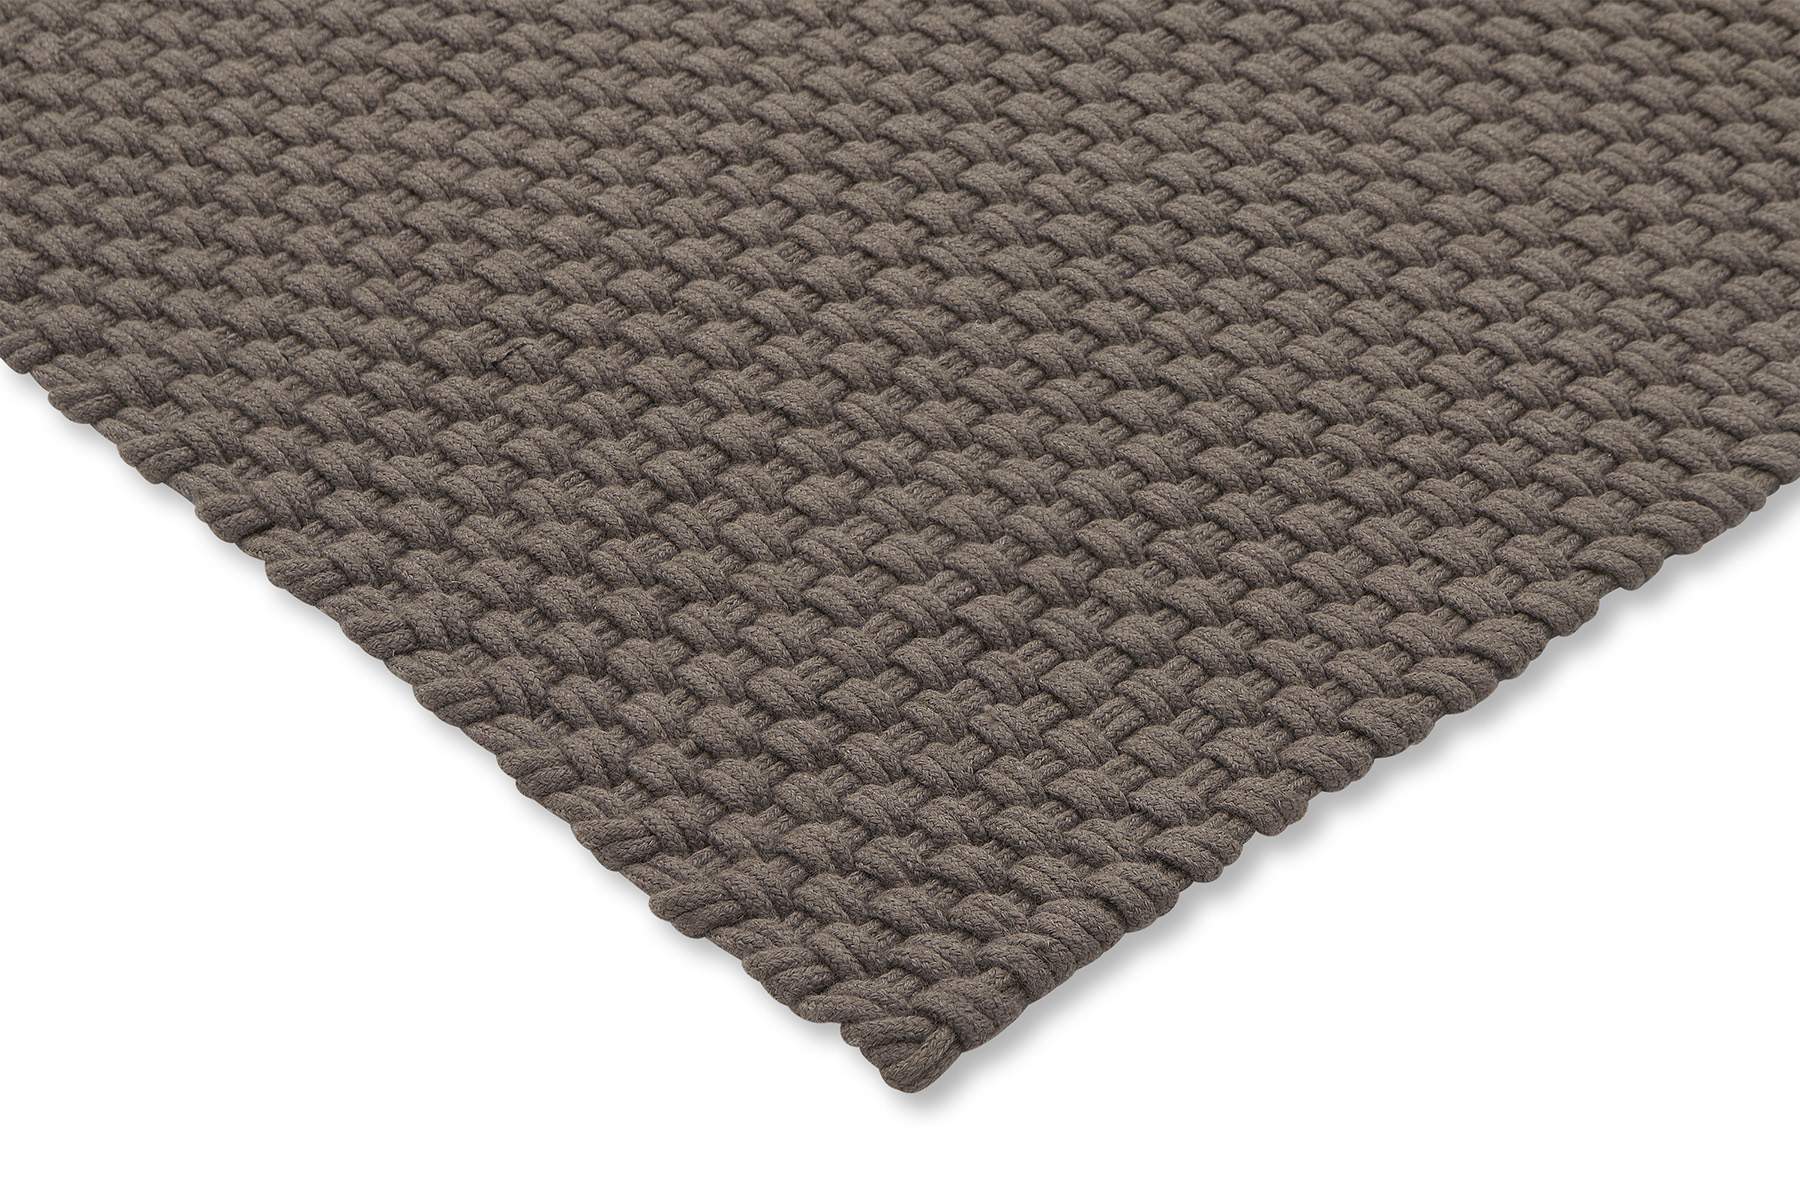 Grey / Taupe Outdoor Handwoven Rug ☞ Size: 160 x 230 cm